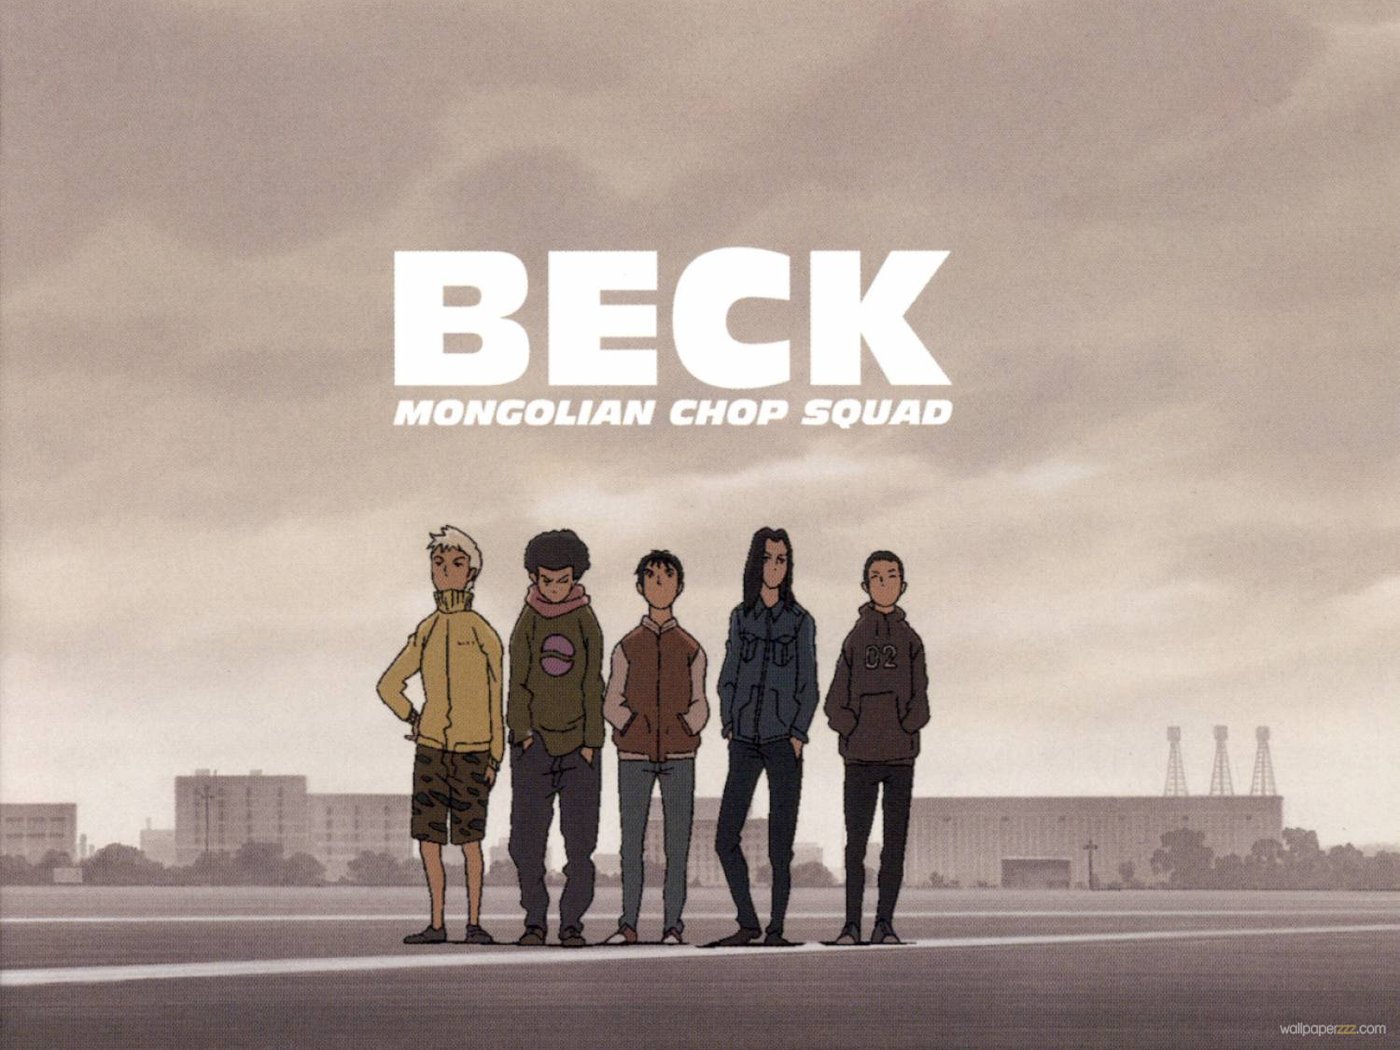 Beck: Mongolian Chop Squad – All the Anime